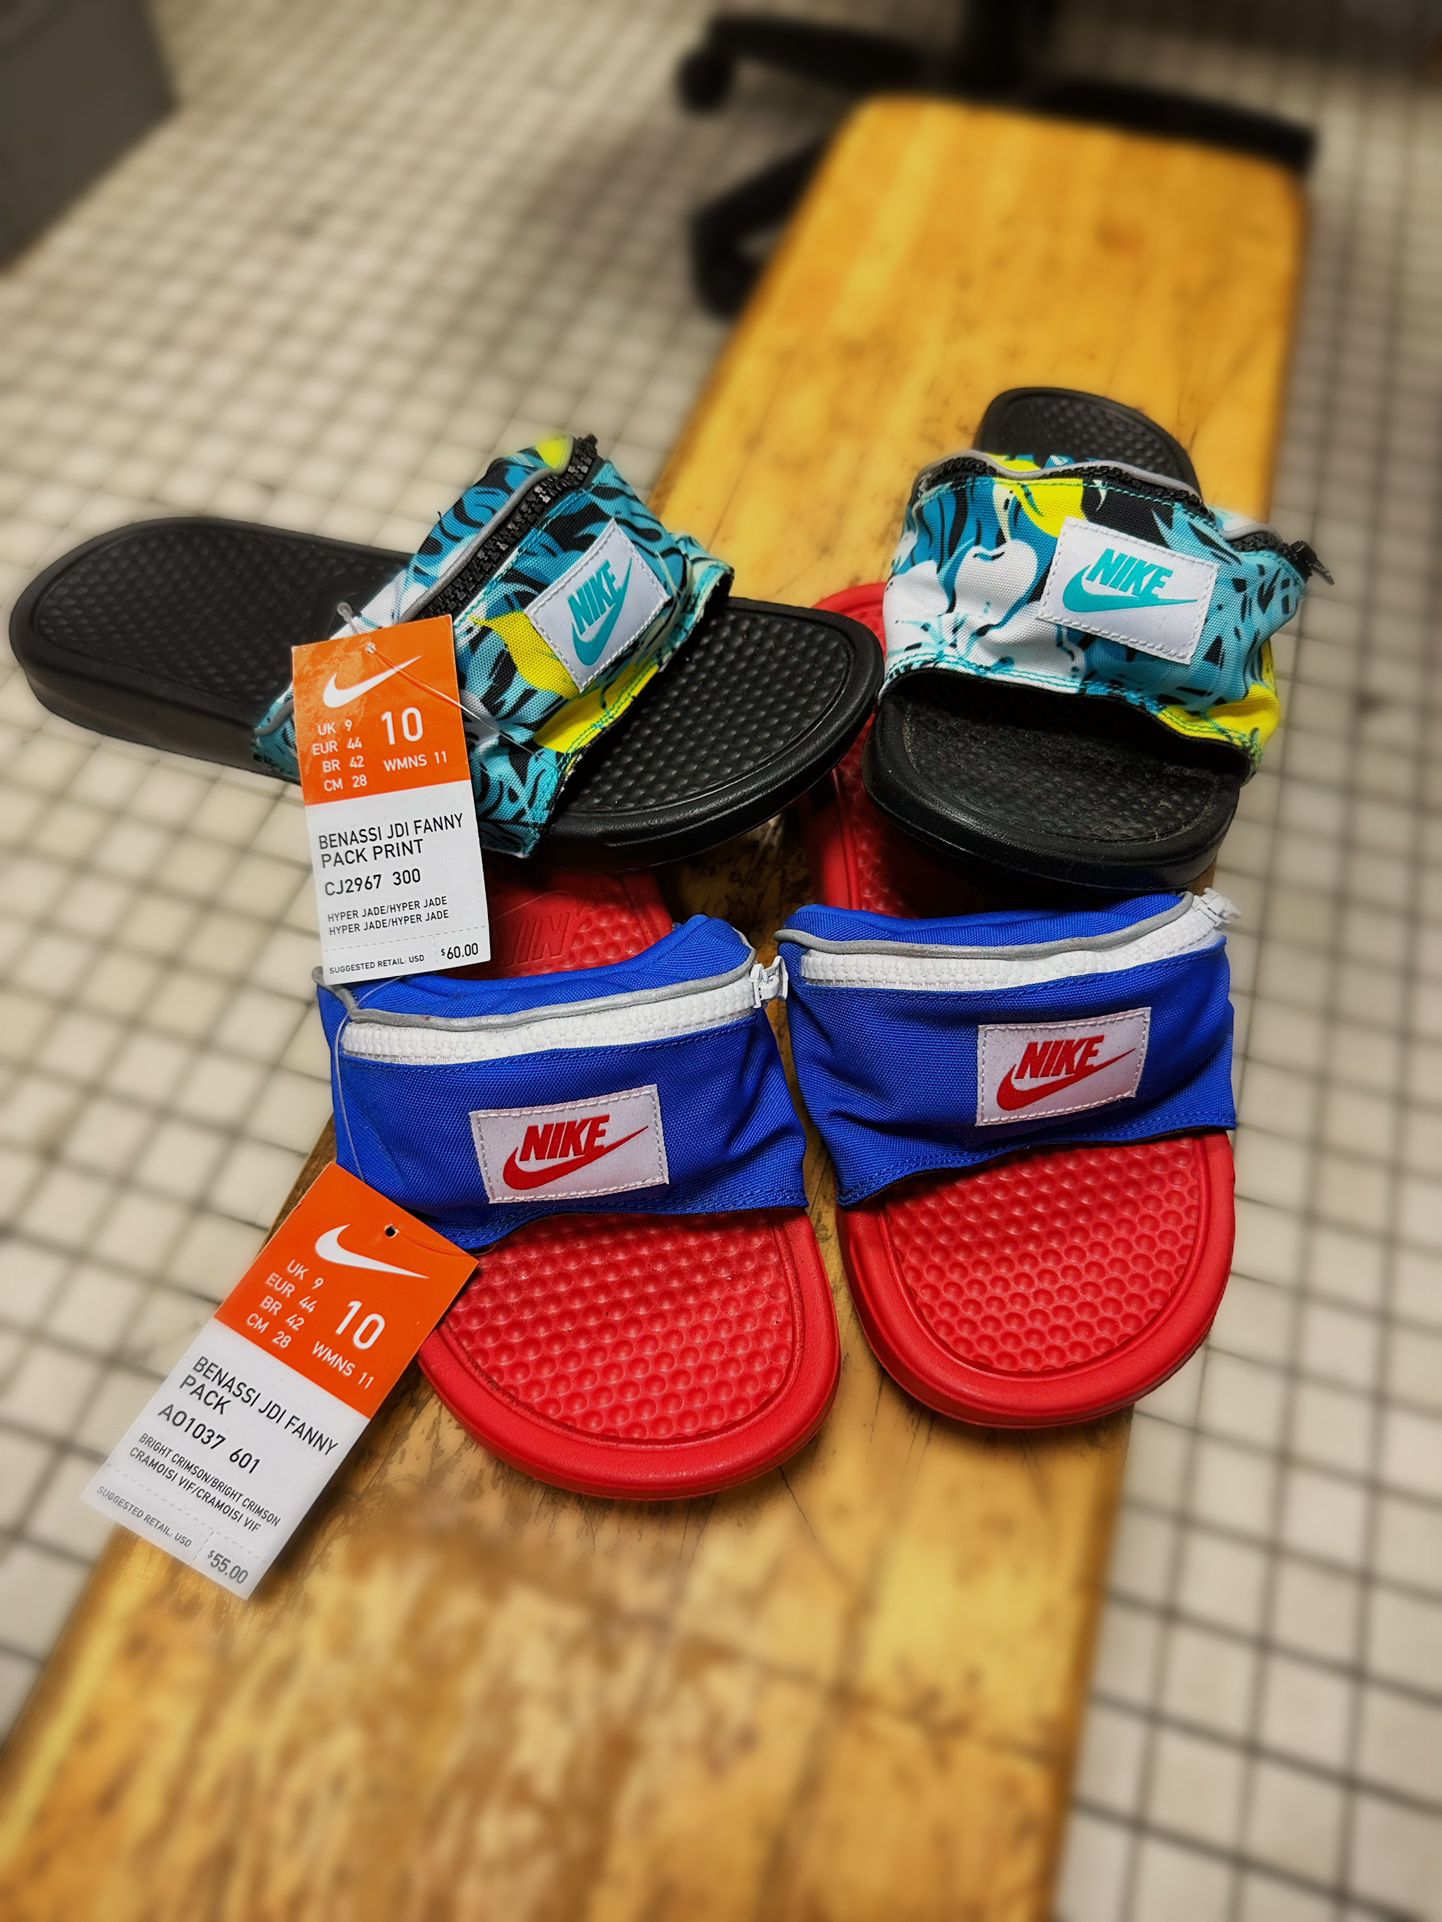 Nike Benassi JDI Fanny Pack & Bright Crimson Brand for Sale in Queens, NY - OfferUp